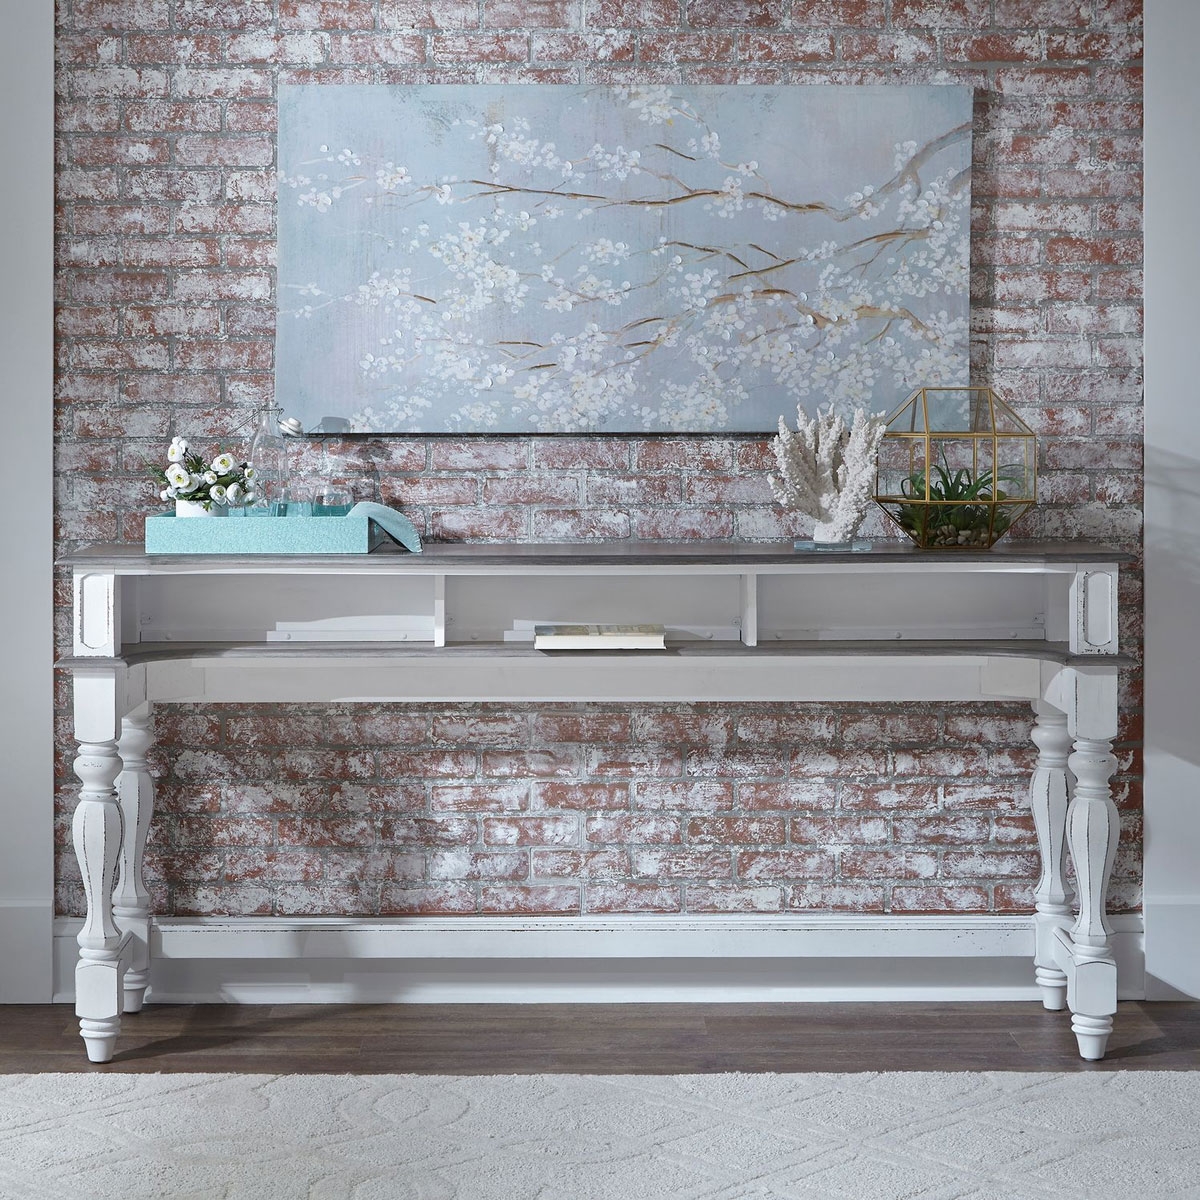 Picture of OLYMPIA CONSOLE BAR TABLE